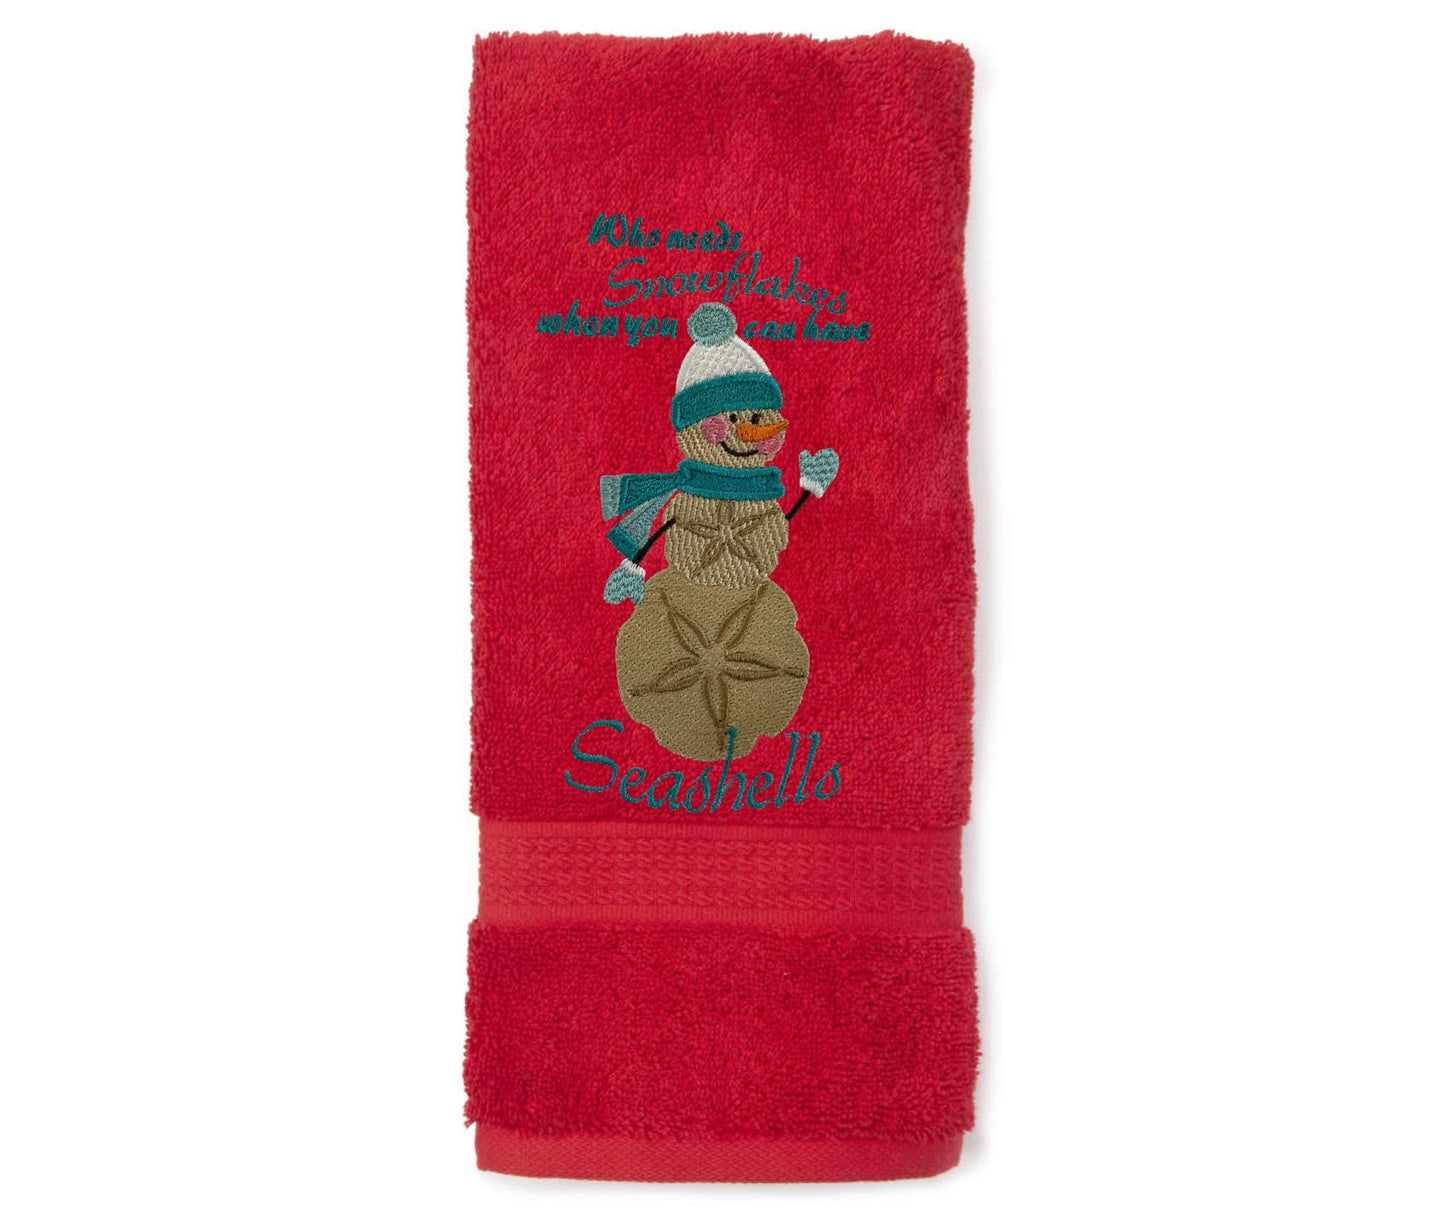 Embroidered Winter “Who Needs Snowflakes When You Have Seashells” Guest Bath Towels. 100% Plush Cotton Hand Towel